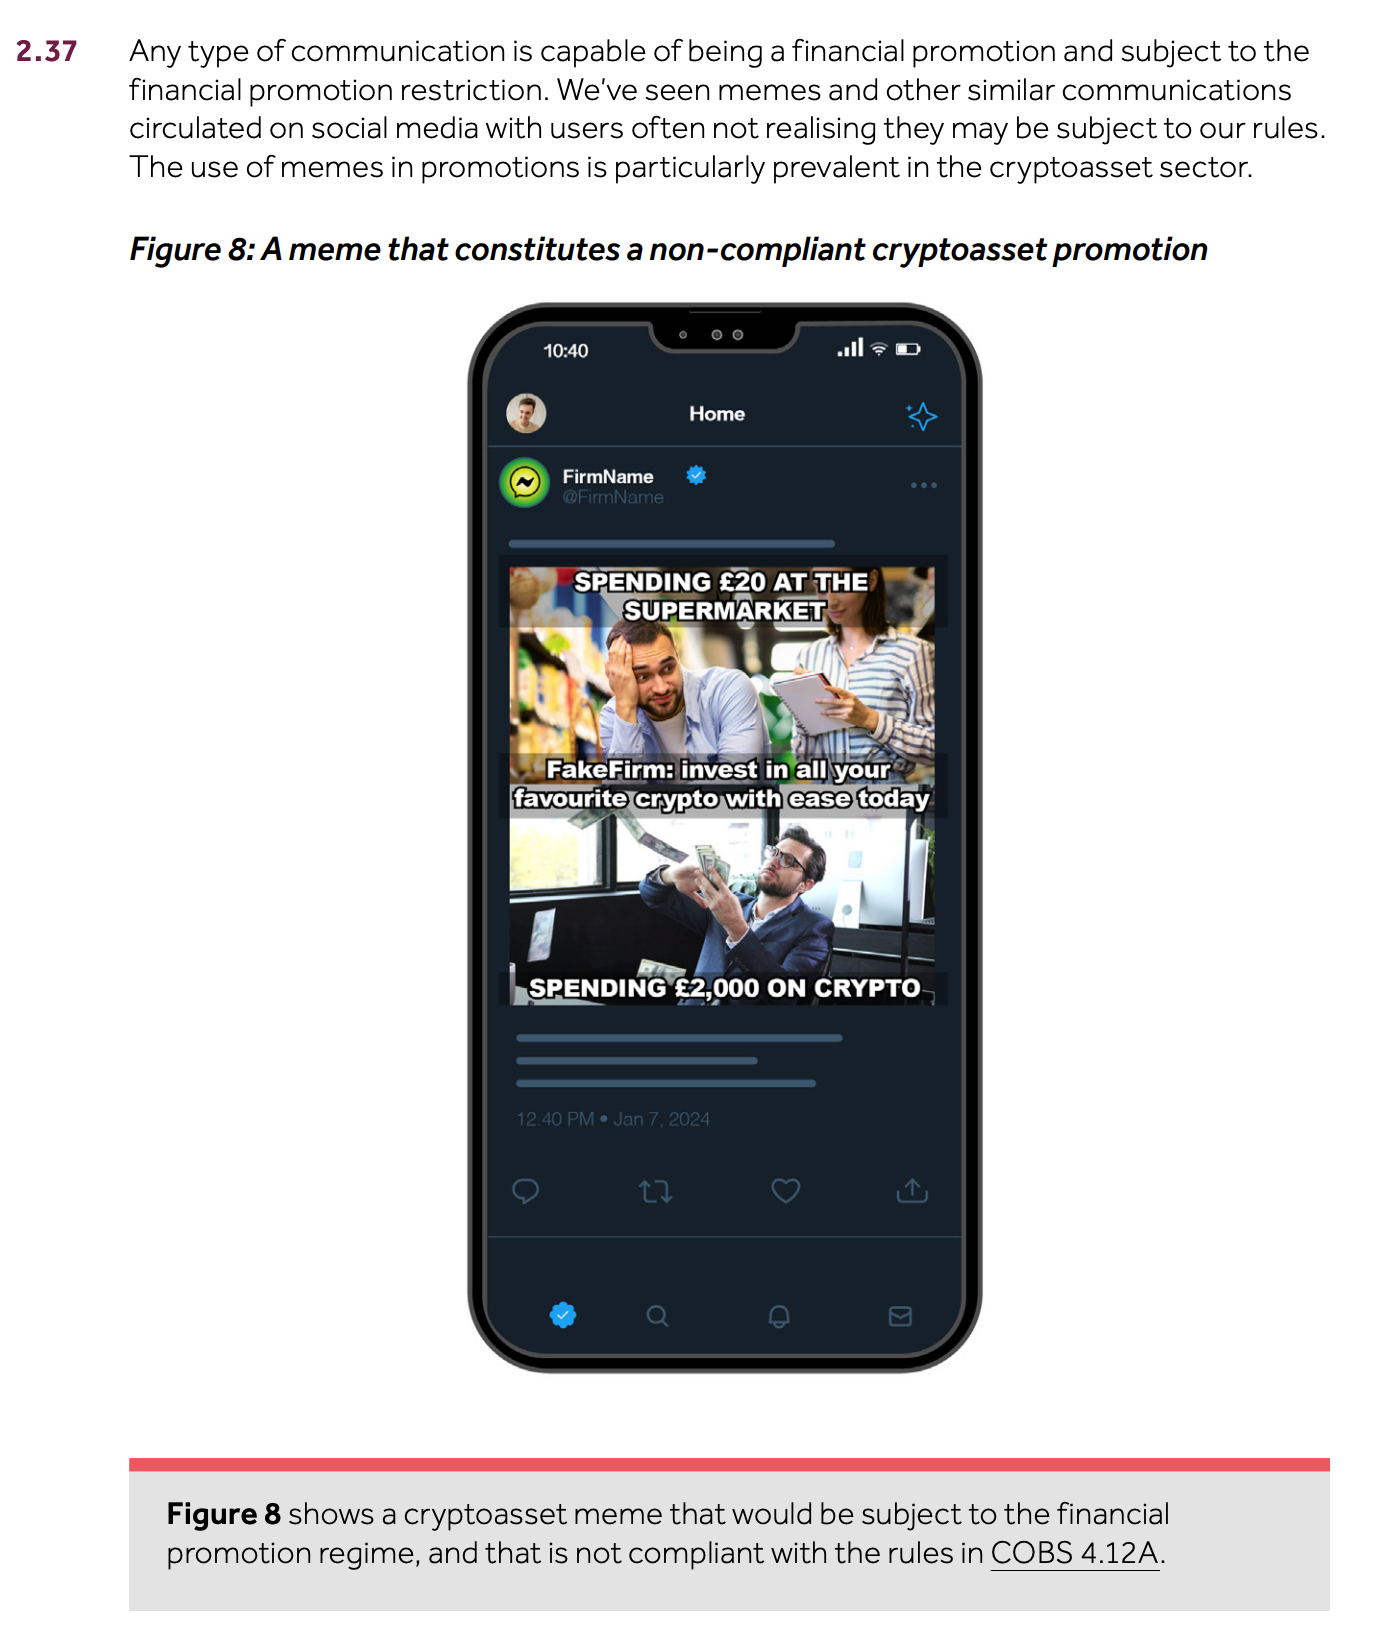 2.37 Any type of communication is capable of being a financial promotion and subject to the financial promotion restriction. We’ve seen memes and other similar communications circulated on social media with users often not realising they may be subject to our rules. The use of memes in promotions is particularly prevalent in the cryptoasset sector. Figure 8: A meme that constitutes a non‑compliant cryptoasset promotion